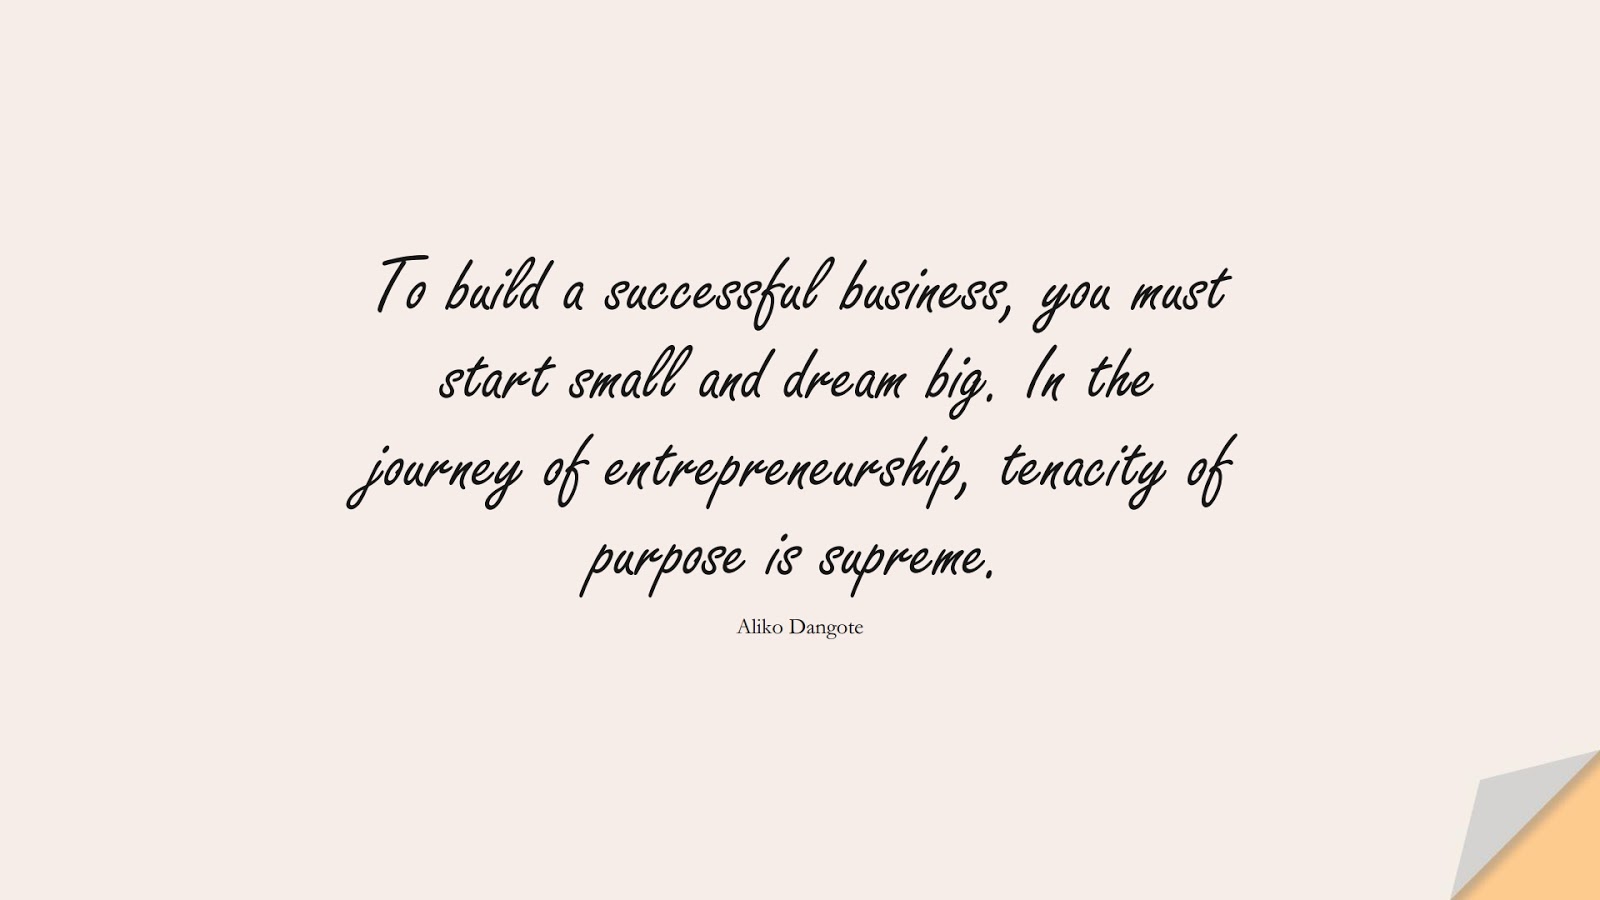 To build a successful business, you must start small and dream big. In the journey of entrepreneurship, tenacity of purpose is supreme. (Aliko Dangote);  #PositiveQuotes